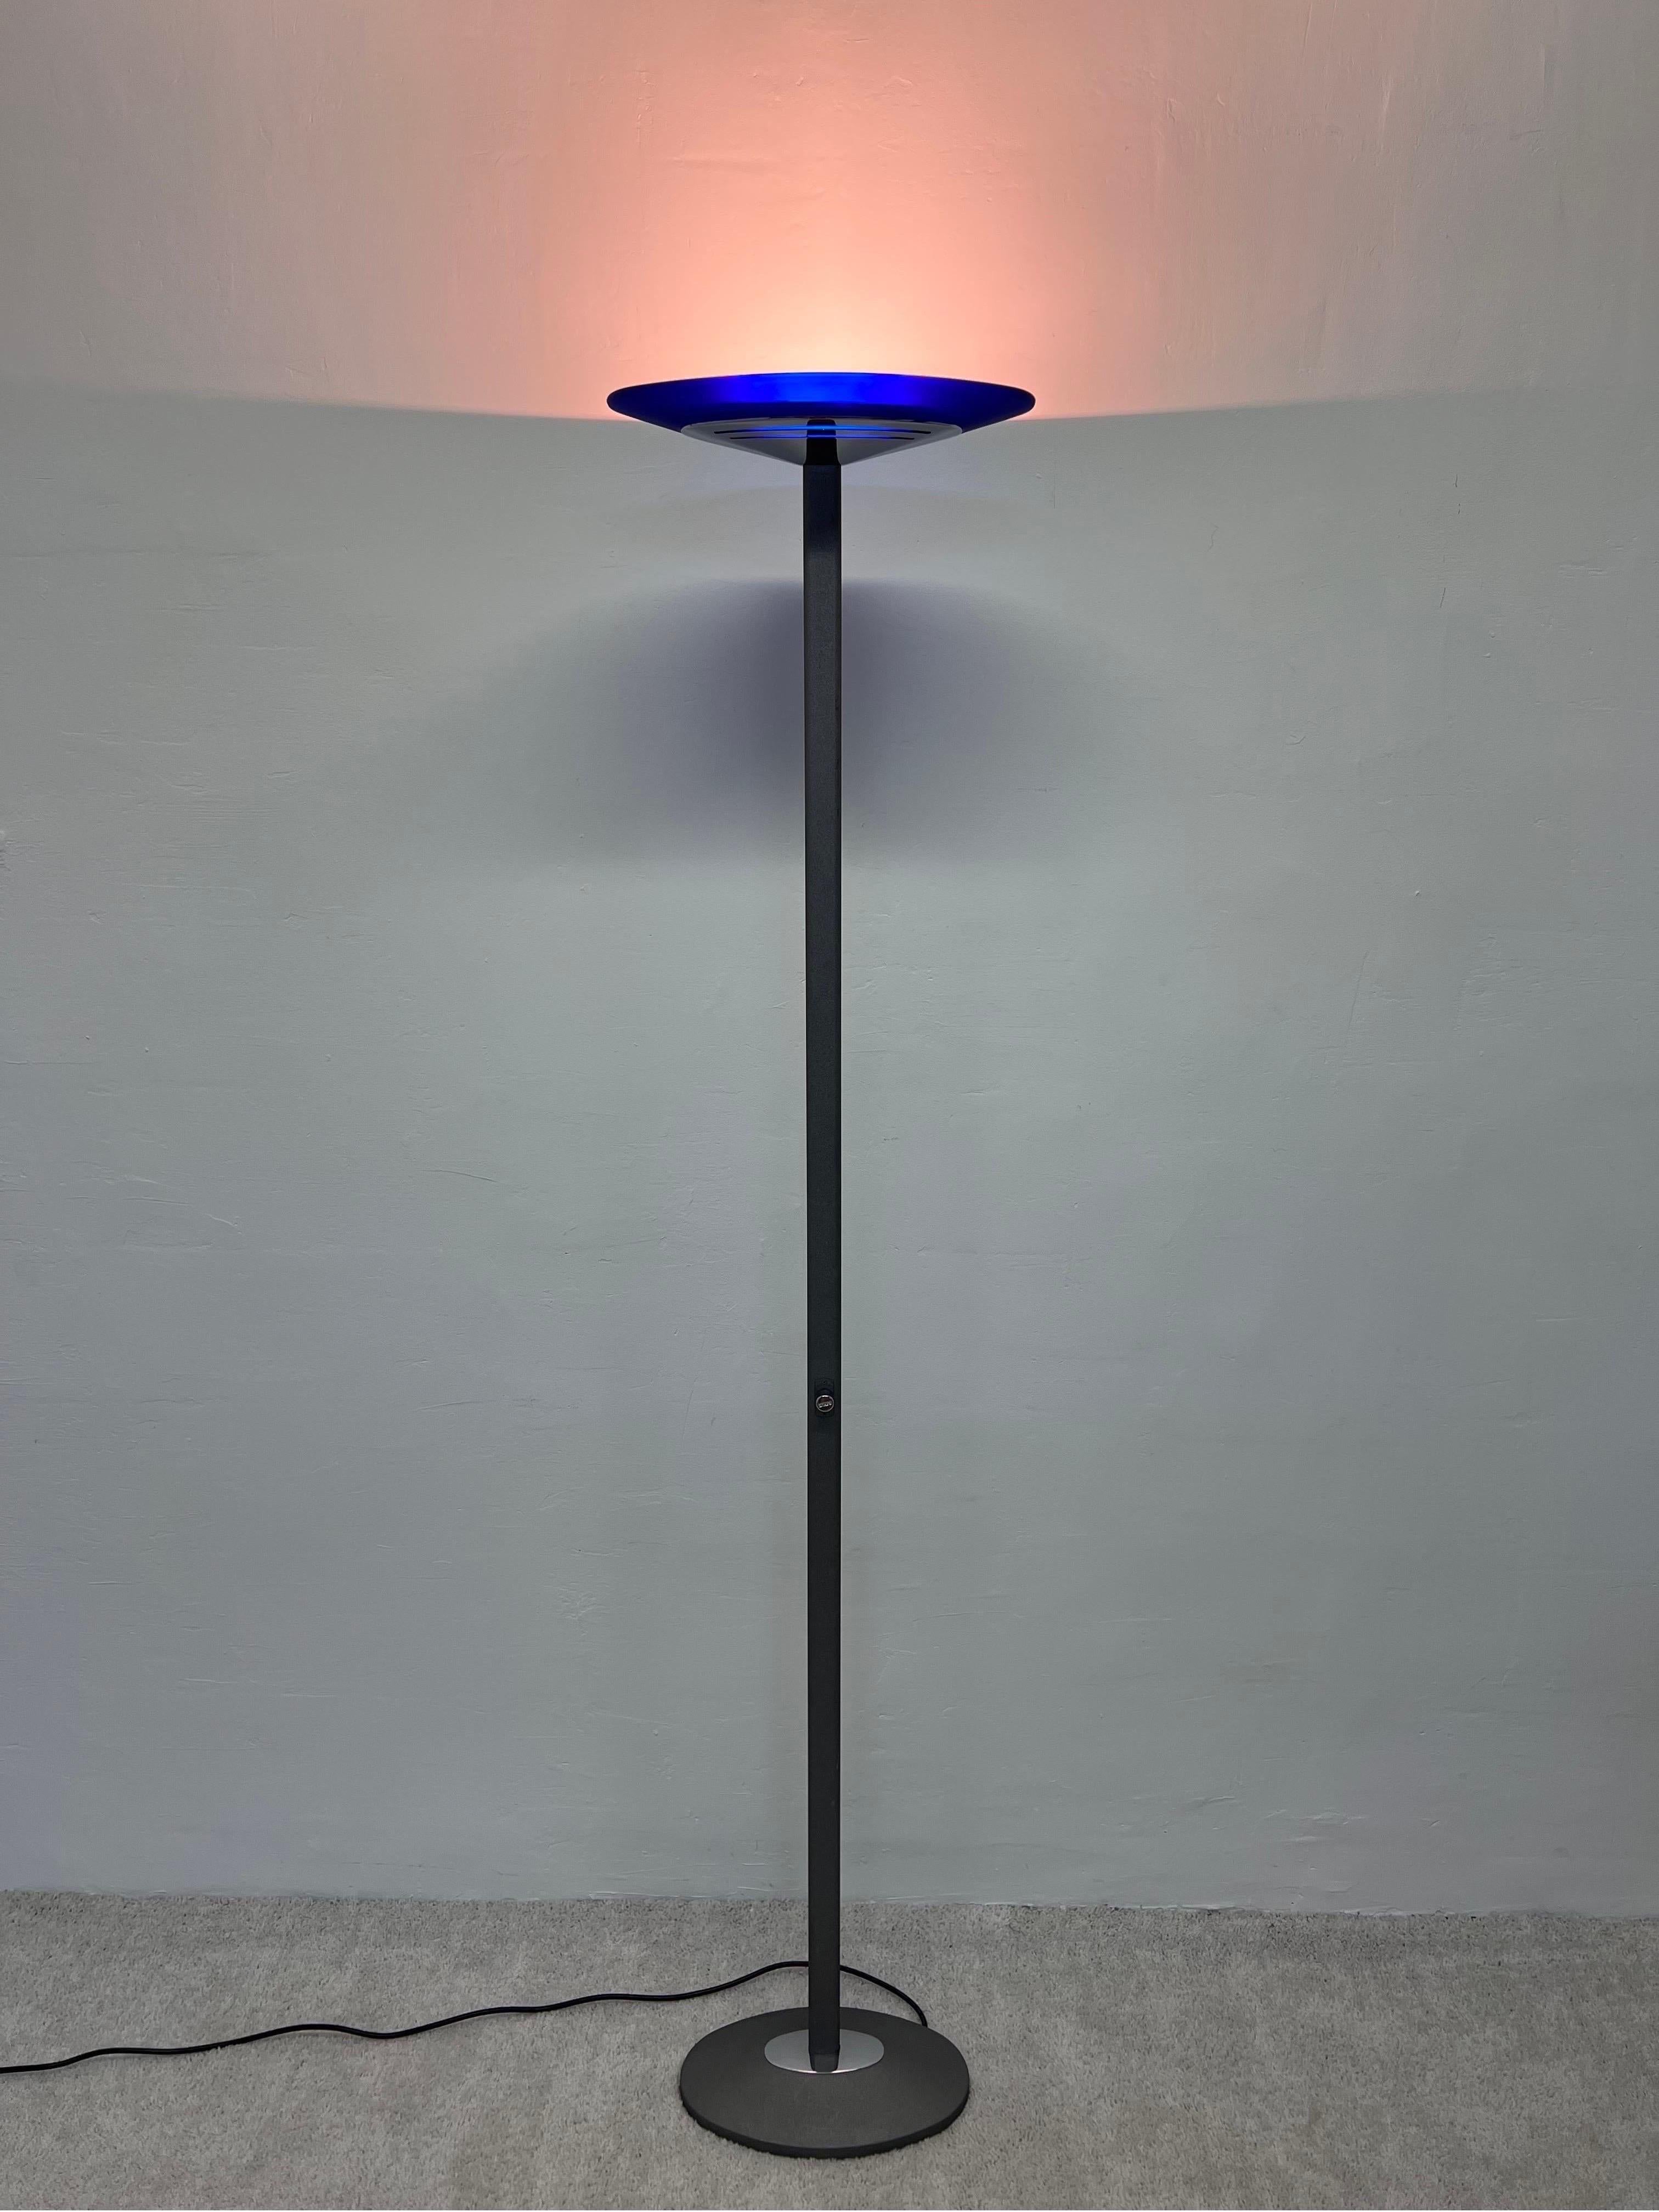 Italian Postmodern Torchiere Floor Lamp With Frosted Blue Glass Shade by Estiluz